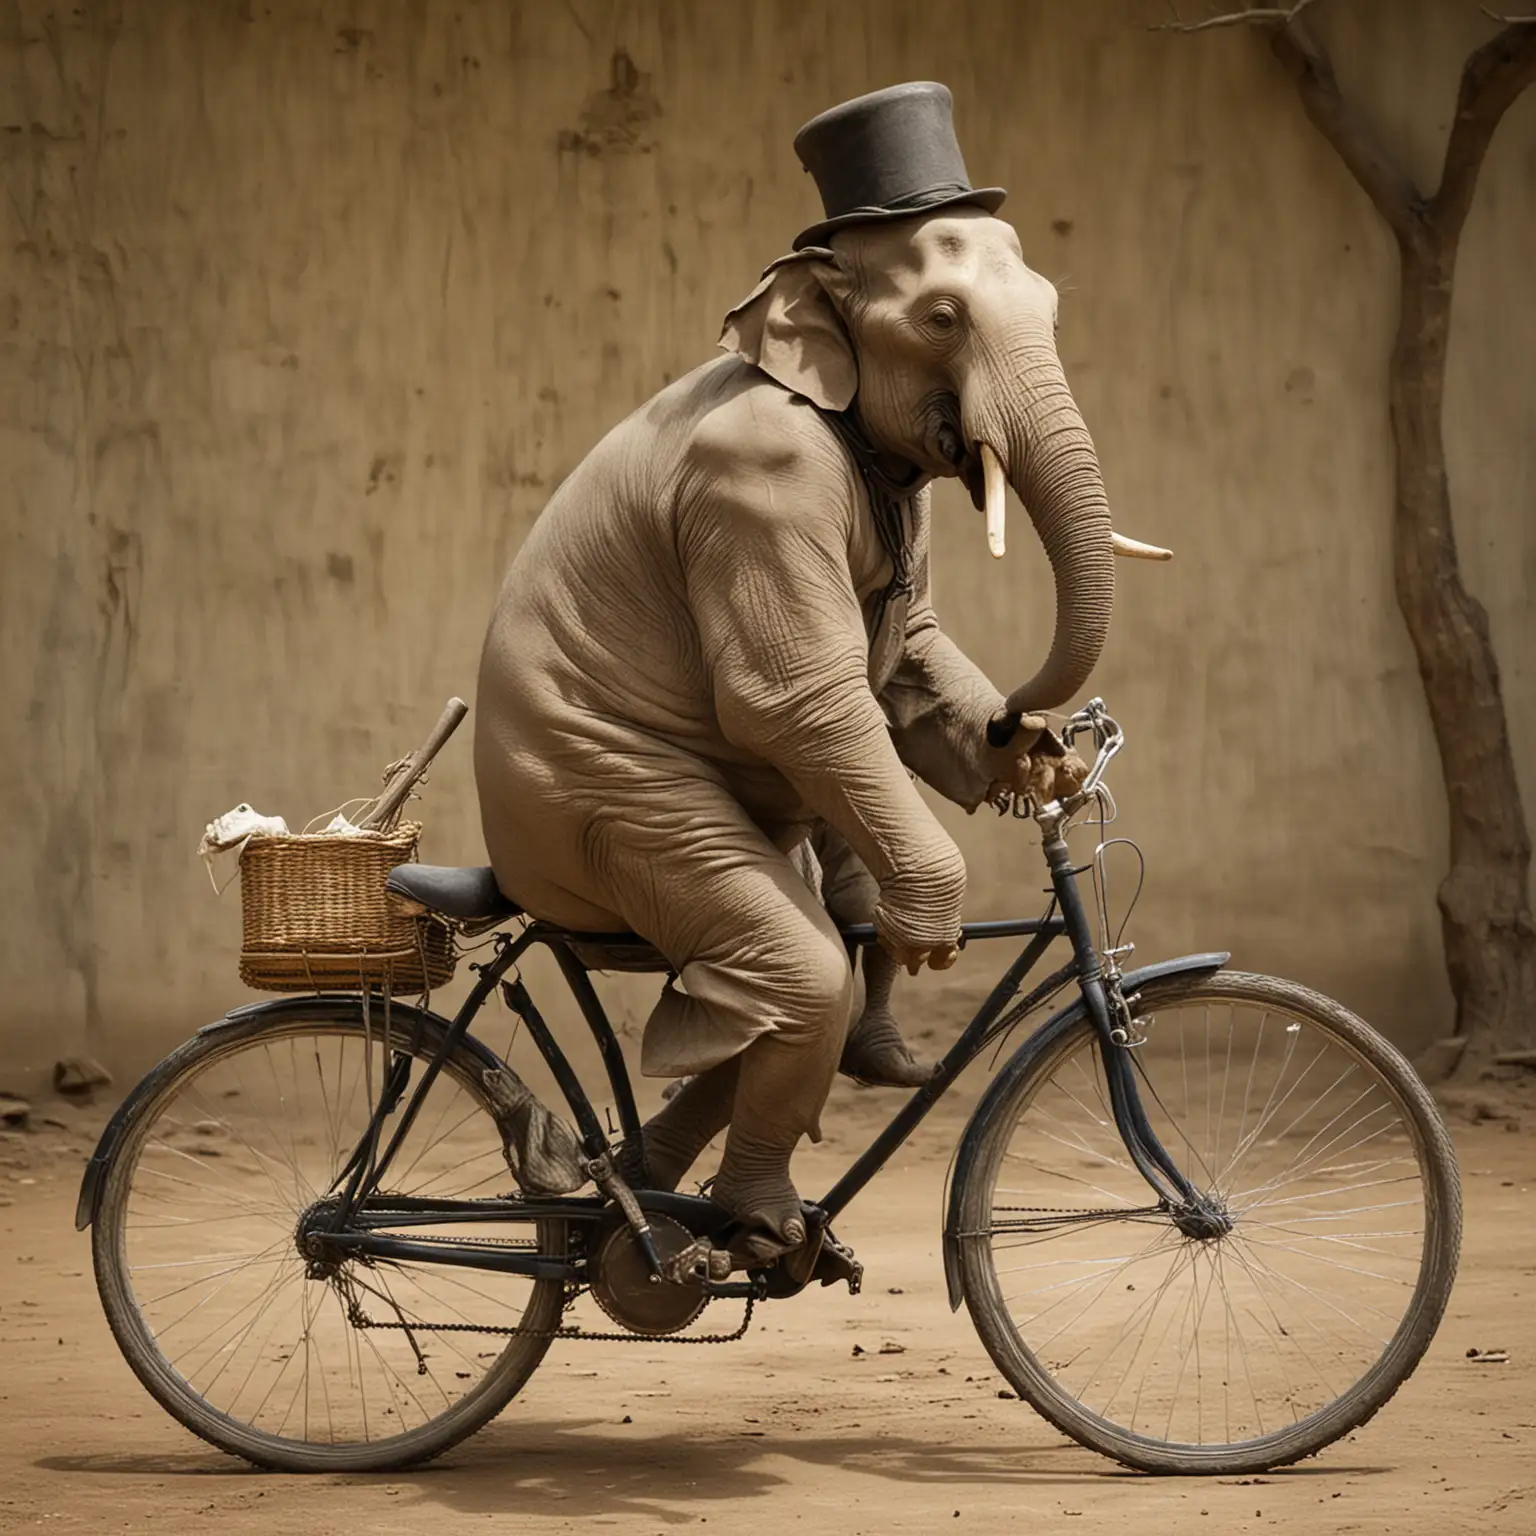 Elephant Man Riding Bicycle Whimsical Fantasy Art of a Pachyderm on Wheels